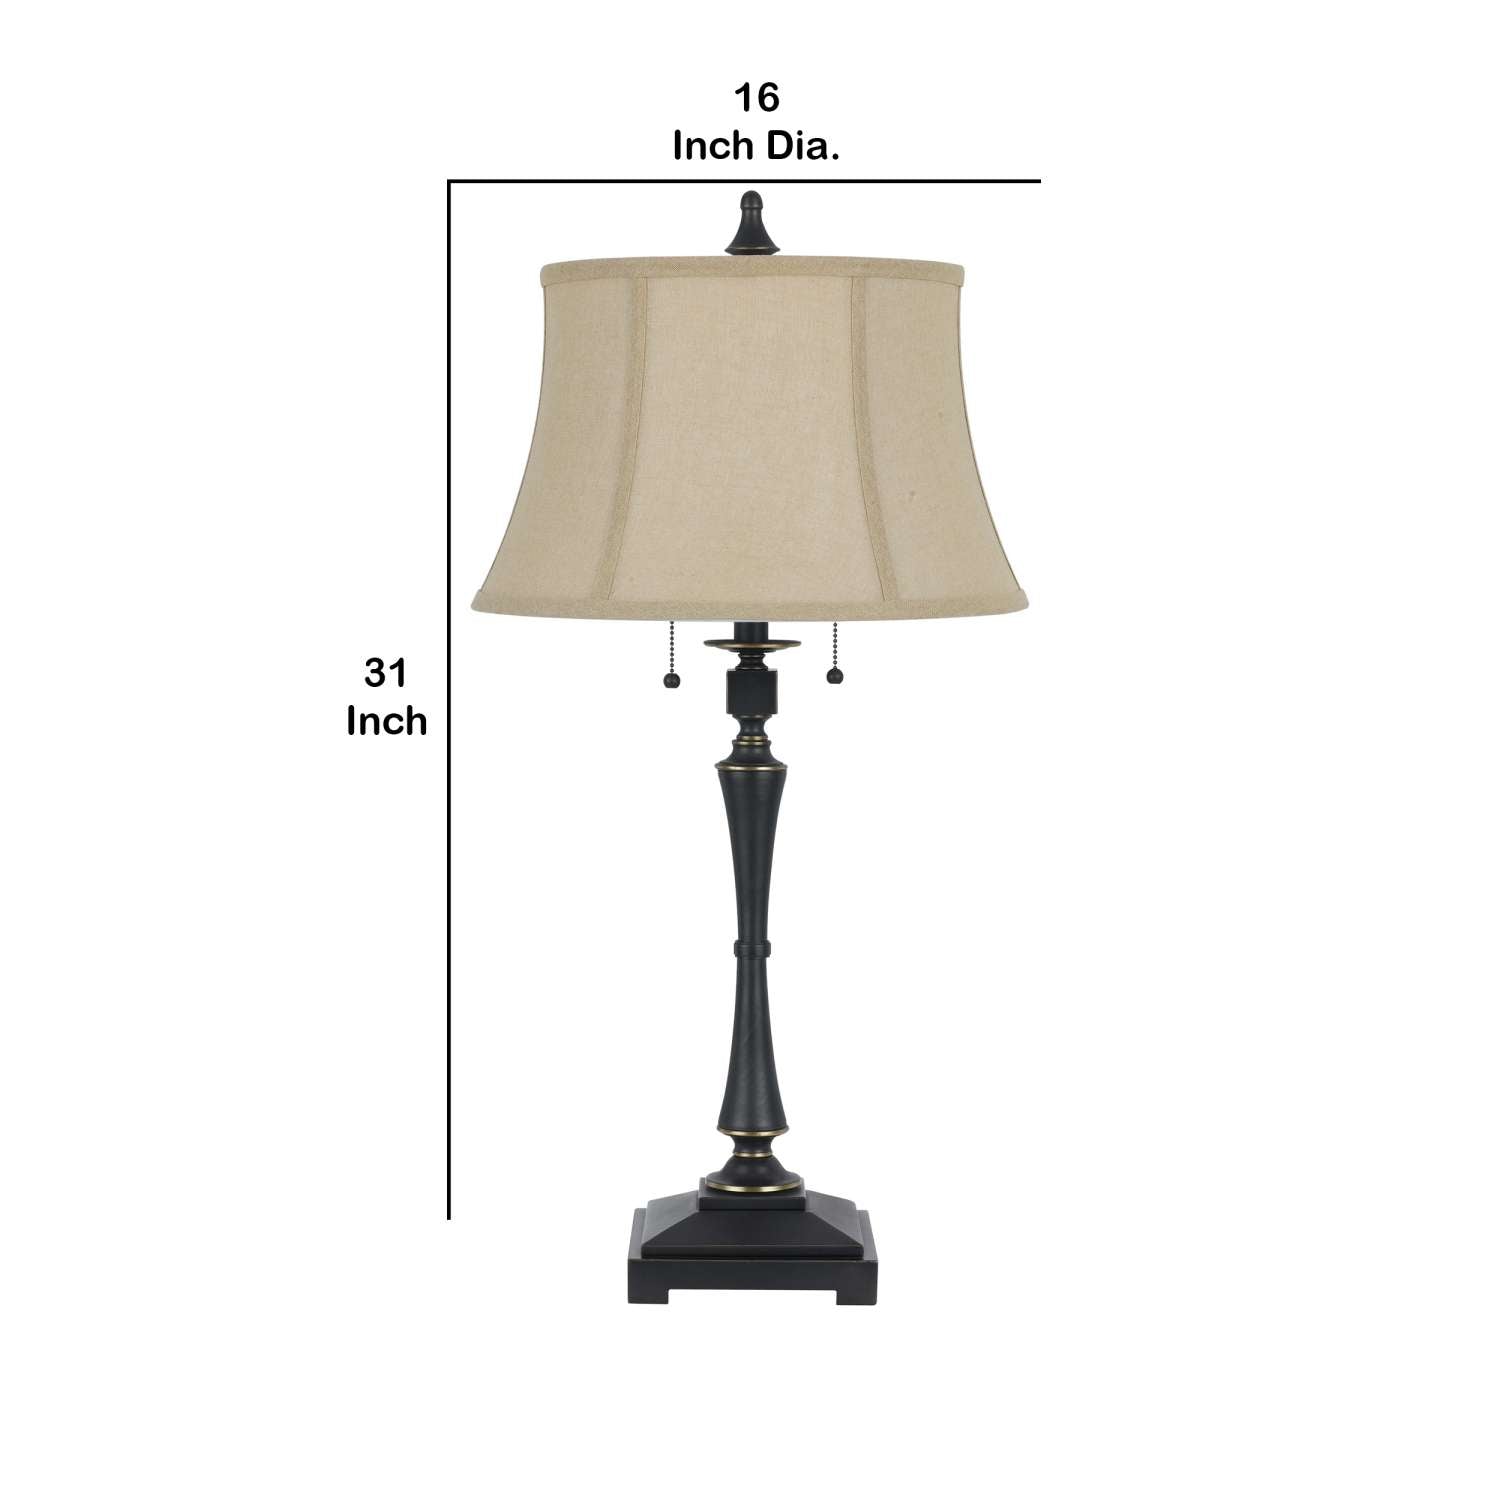 Metal Body Table Lamp With Fabric Tapered Bell Shade, Beige And Black By Benzara